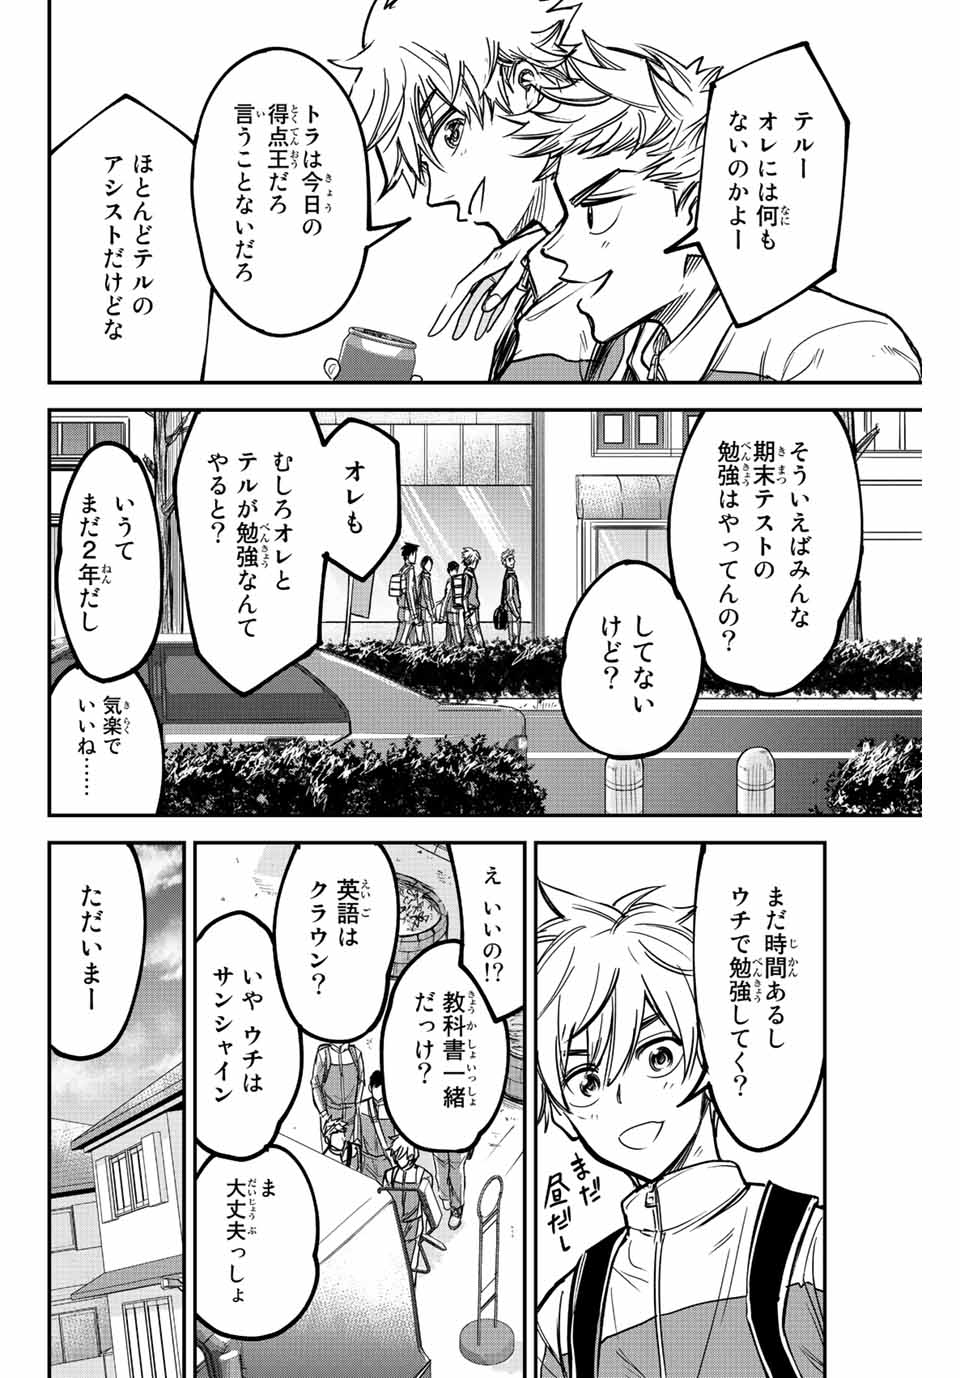 B＆ALIVE 第1.1話 - Page 6